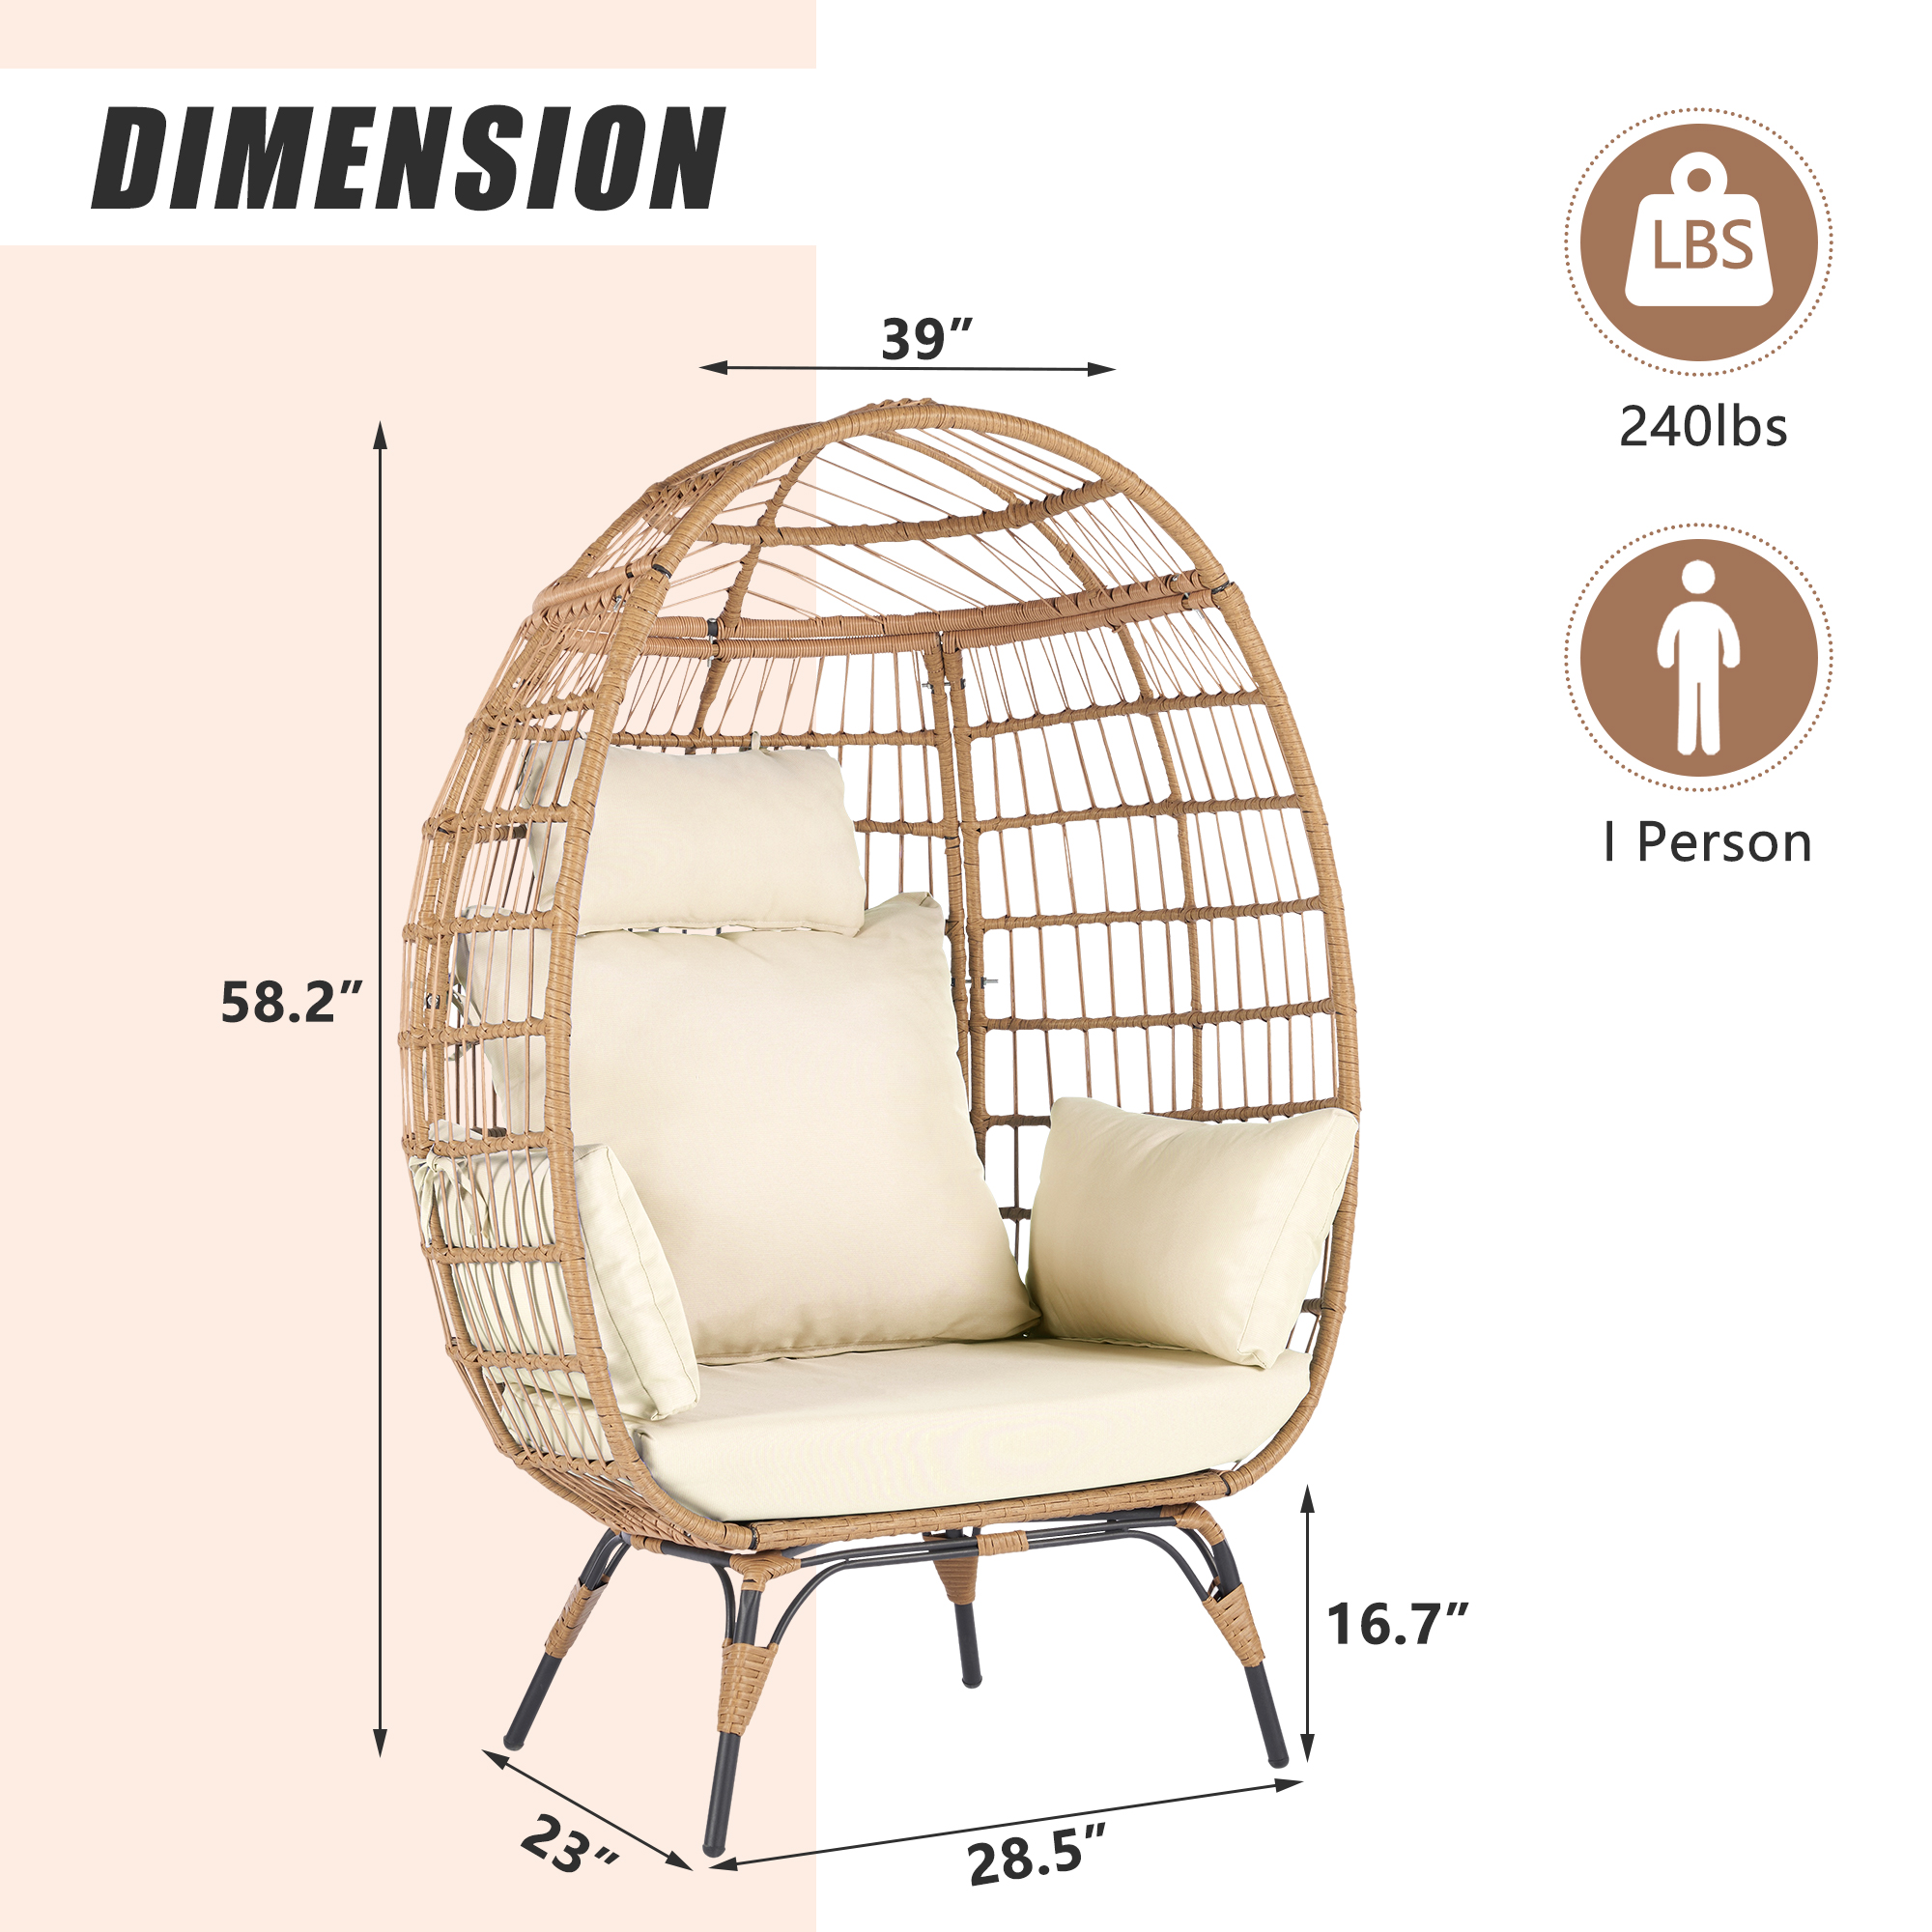 Wicker Egg Chair, Oversized Indoor Outdoor Boho Lounger Chair Stationary Egg Basket Chair, All-Weather 440lb Capacity Patio Chair, Beige - image 3 of 8